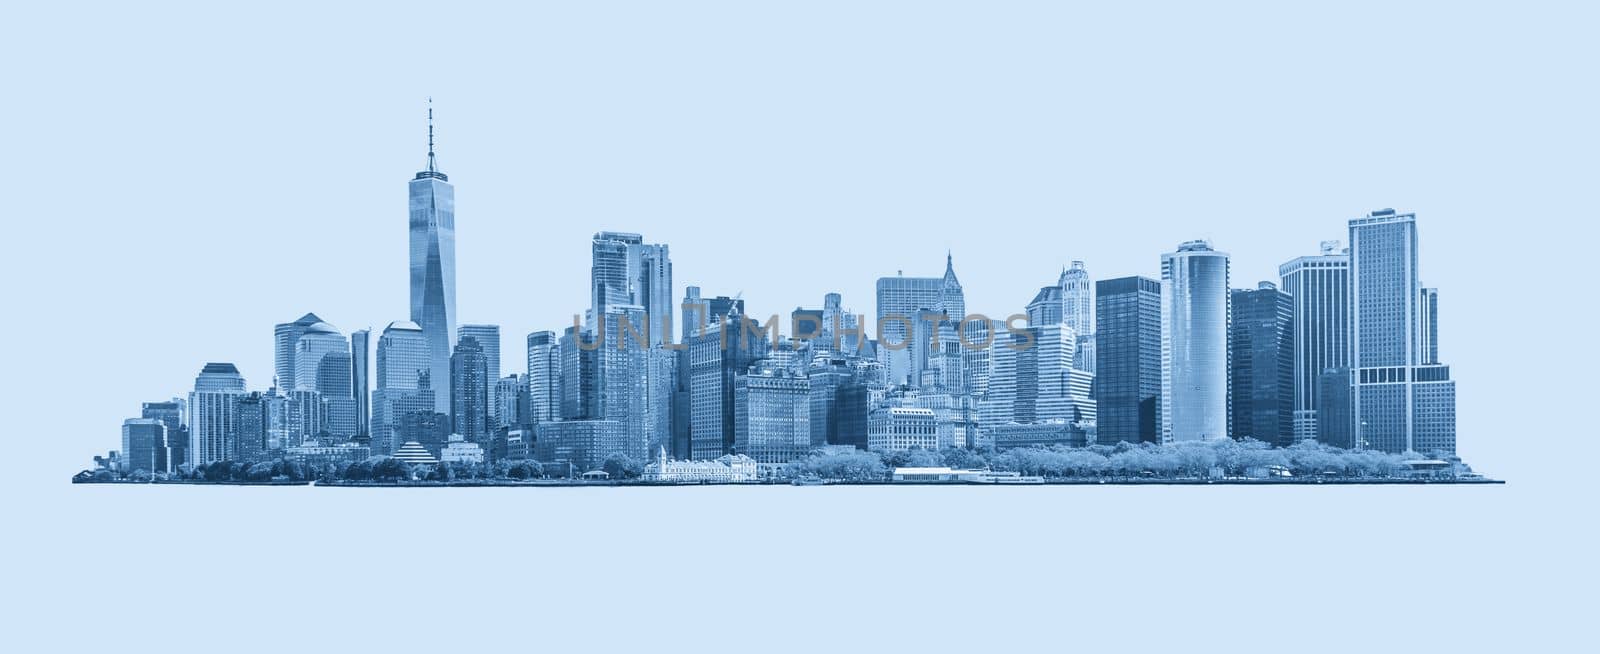 Skyline panorama of downtown Financial District and the Lower Manhattan in New York City, USA. Blue toned, isolated on background by Mariakray